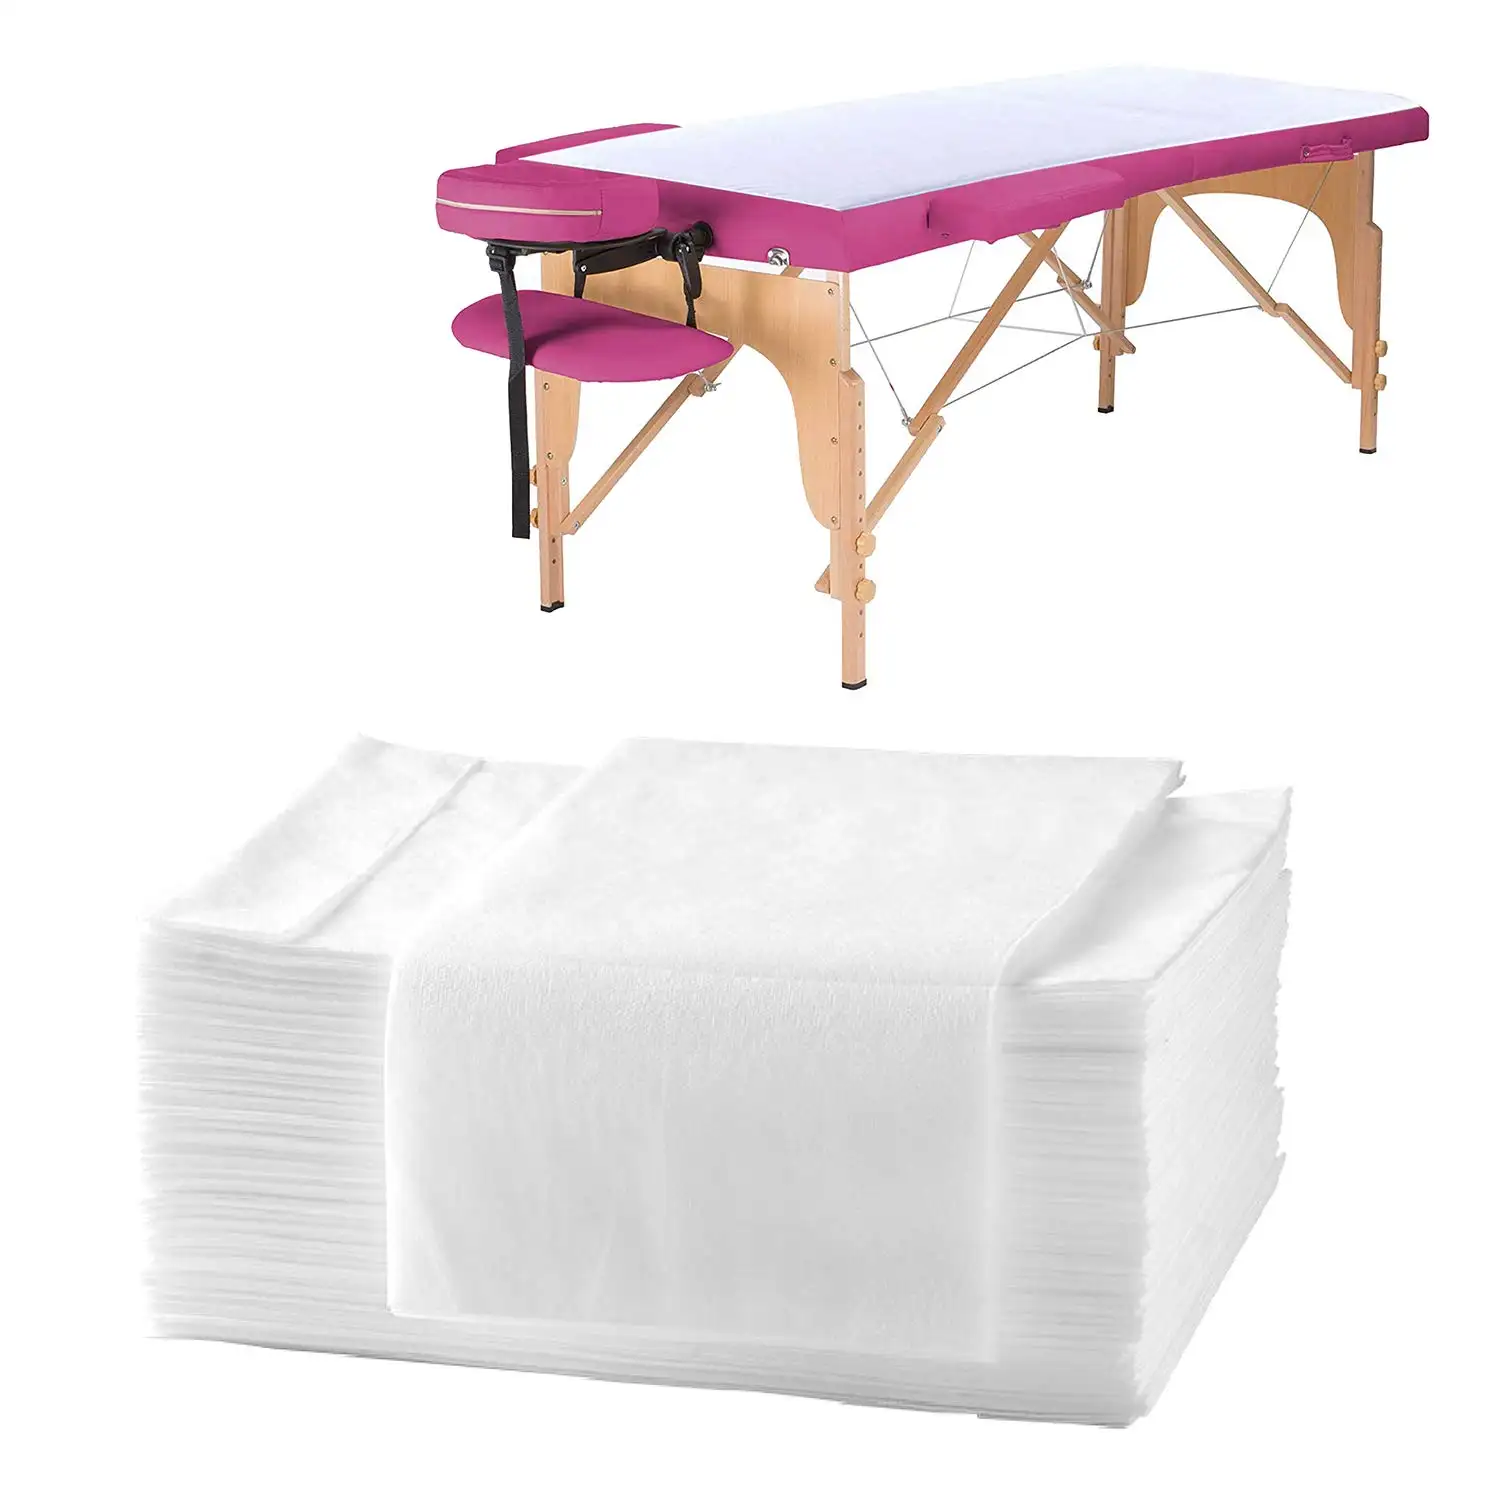 5PCS Disposable Bed Sheets,Waterproof Massage Table Sheets For Spa Lash bed Non-woven Fabric 31" x 70"